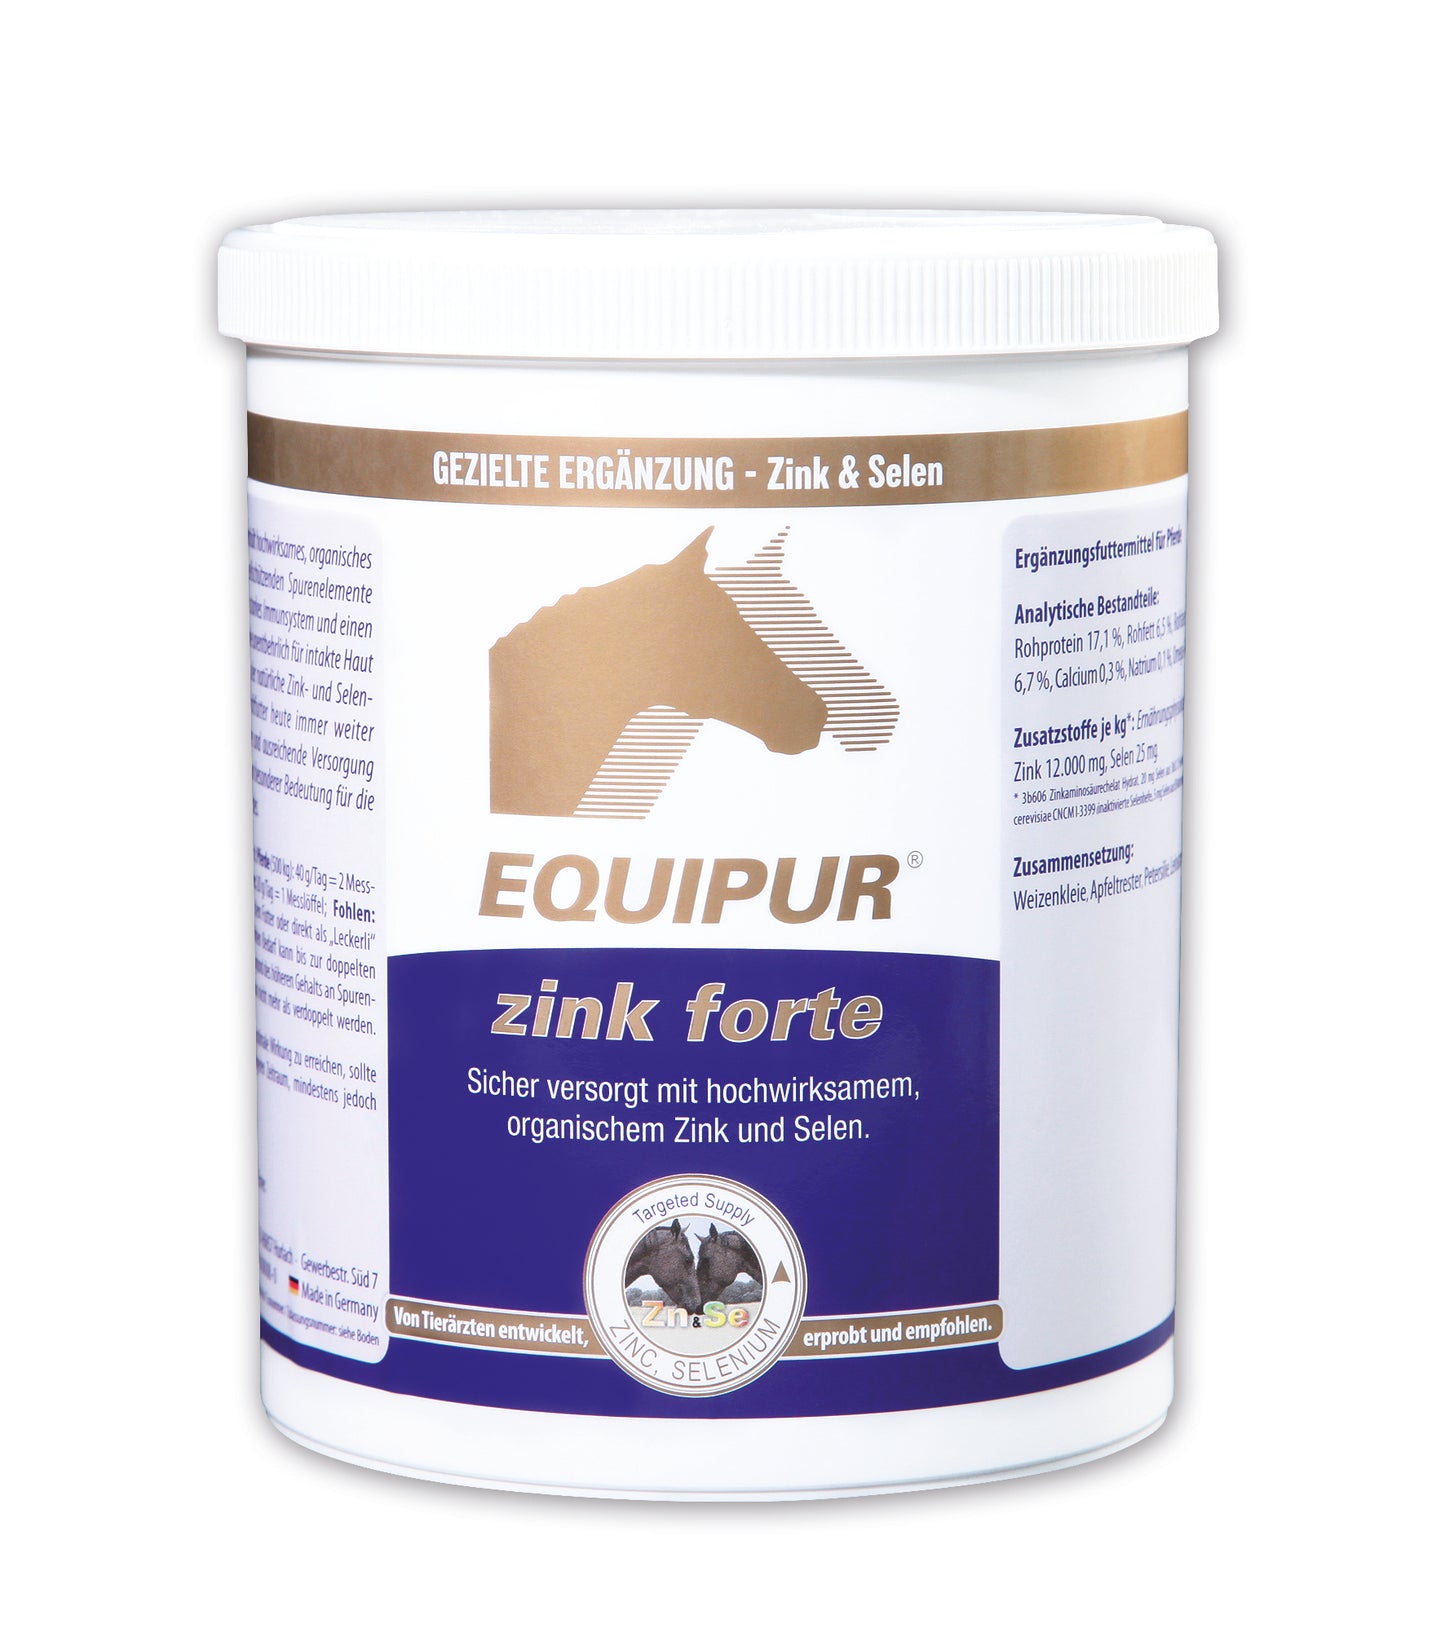 EQUIPUR Zink forte